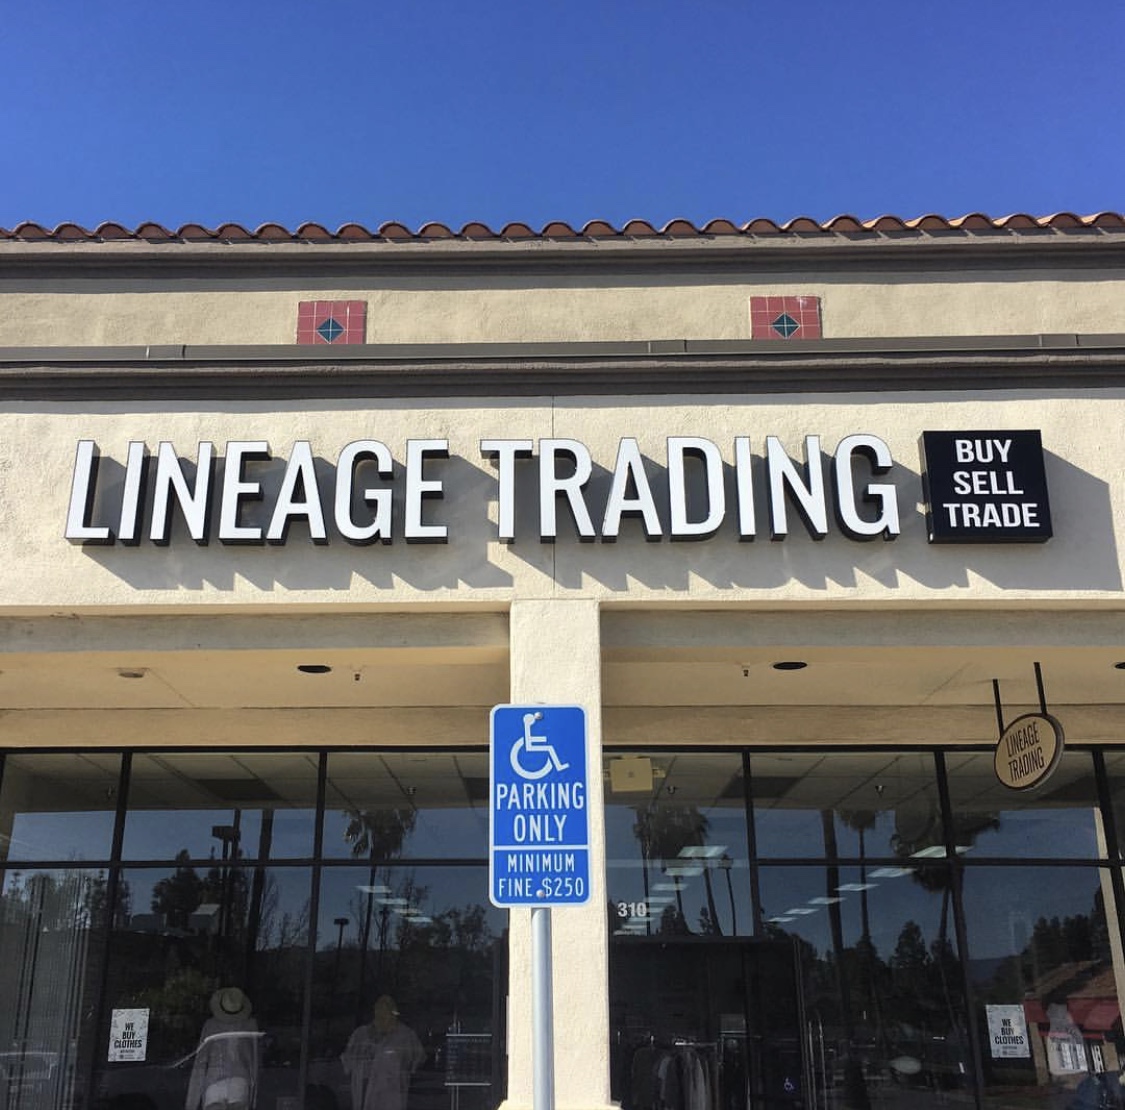 Lineage Trading